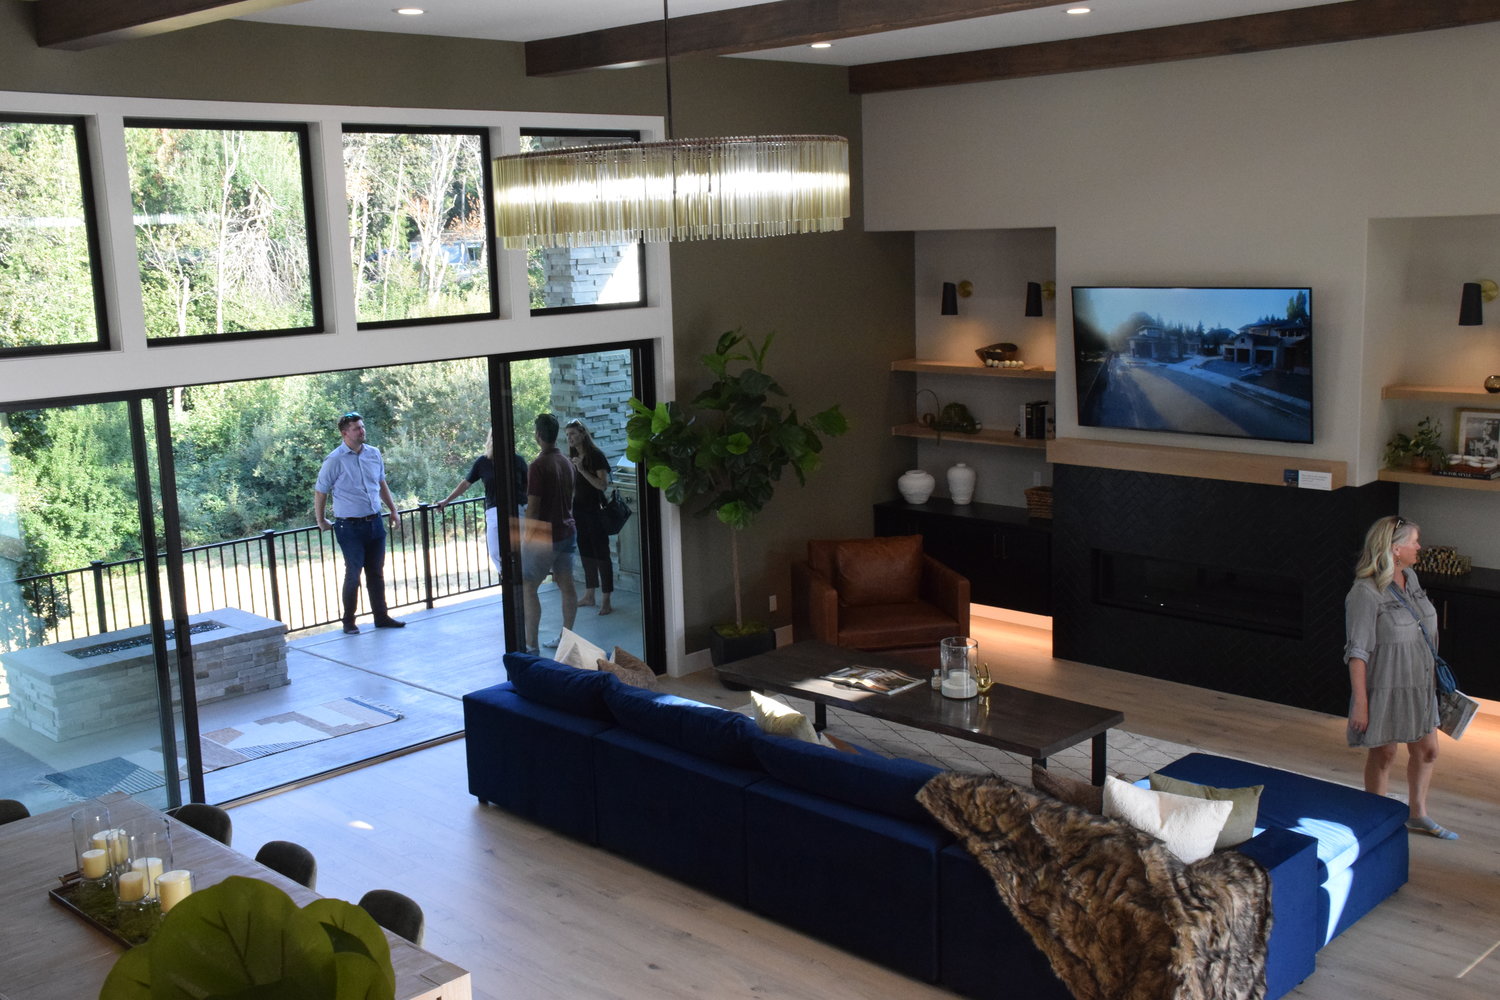 Attendees of the 2022 Parade of Homes mill about the “Oak View,” one of six homes on display at this year’s festivities located in Ridgefield.